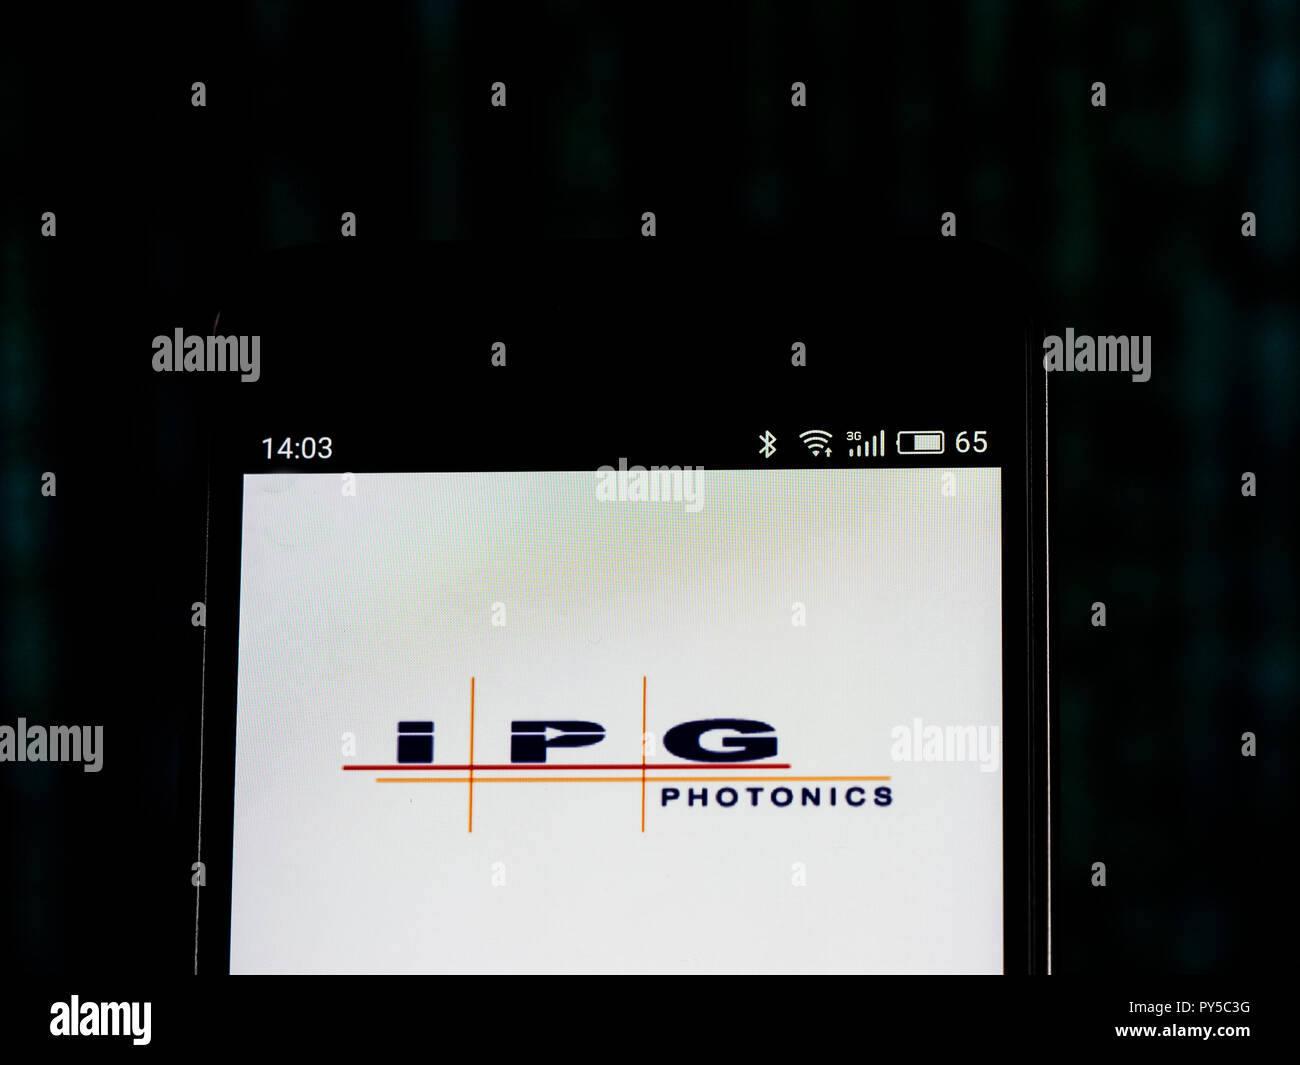 IPG Photonics company logo seen displayed on smart phone. IPG Photonics is a manufacturer of fiber lasers and fiber amplifiers. Stock Photo